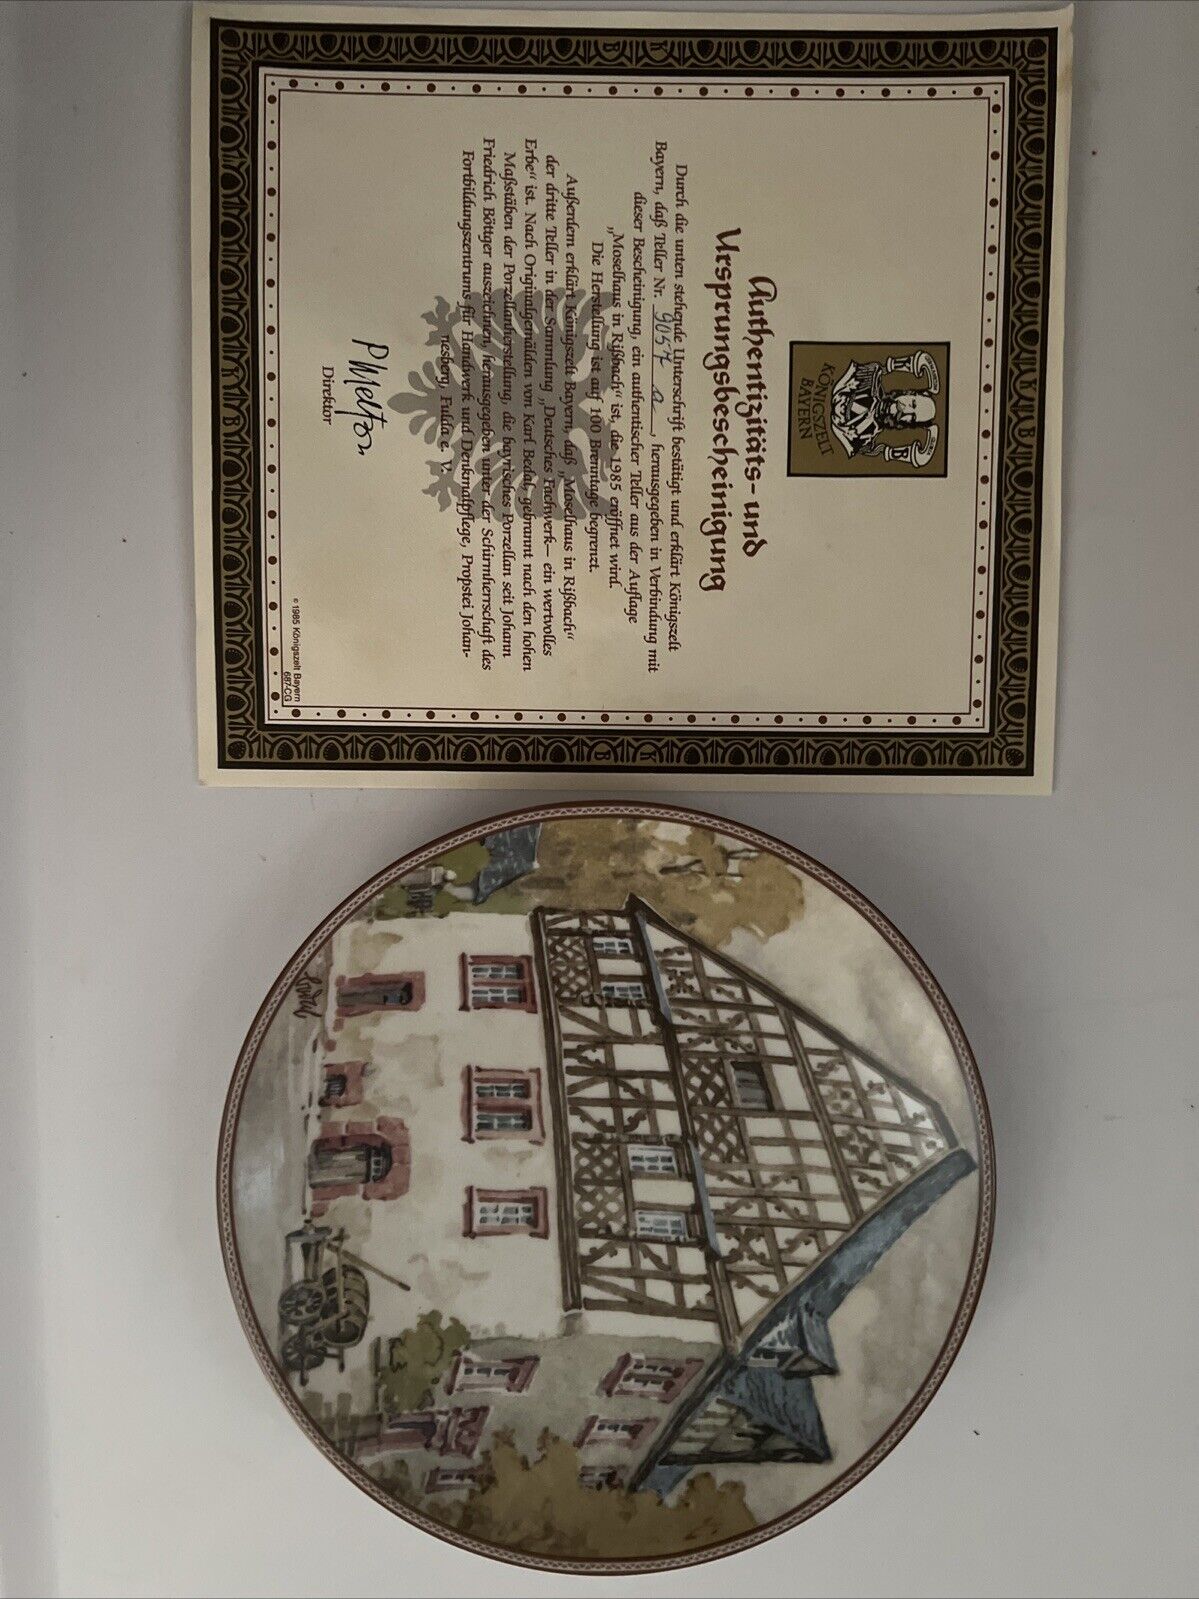 Vintage Moselle River House Konigszelt Bayern With Certificate Of Authenticity